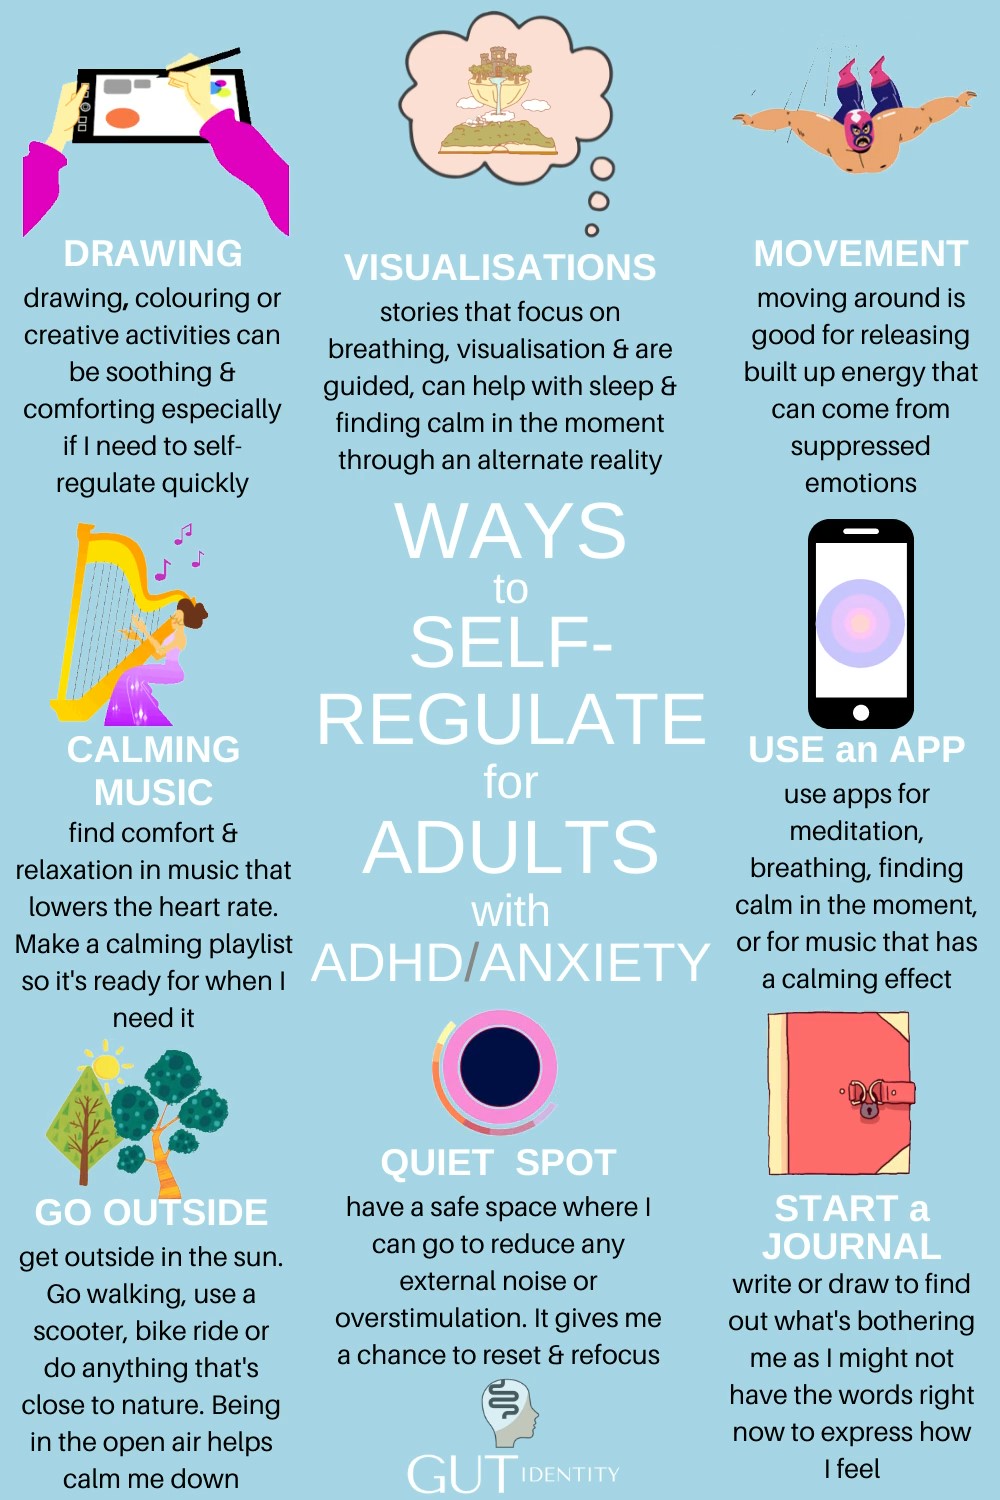 Ways to Self-Regulate for Adults with ADHD and Anxiety by Gutidentity 